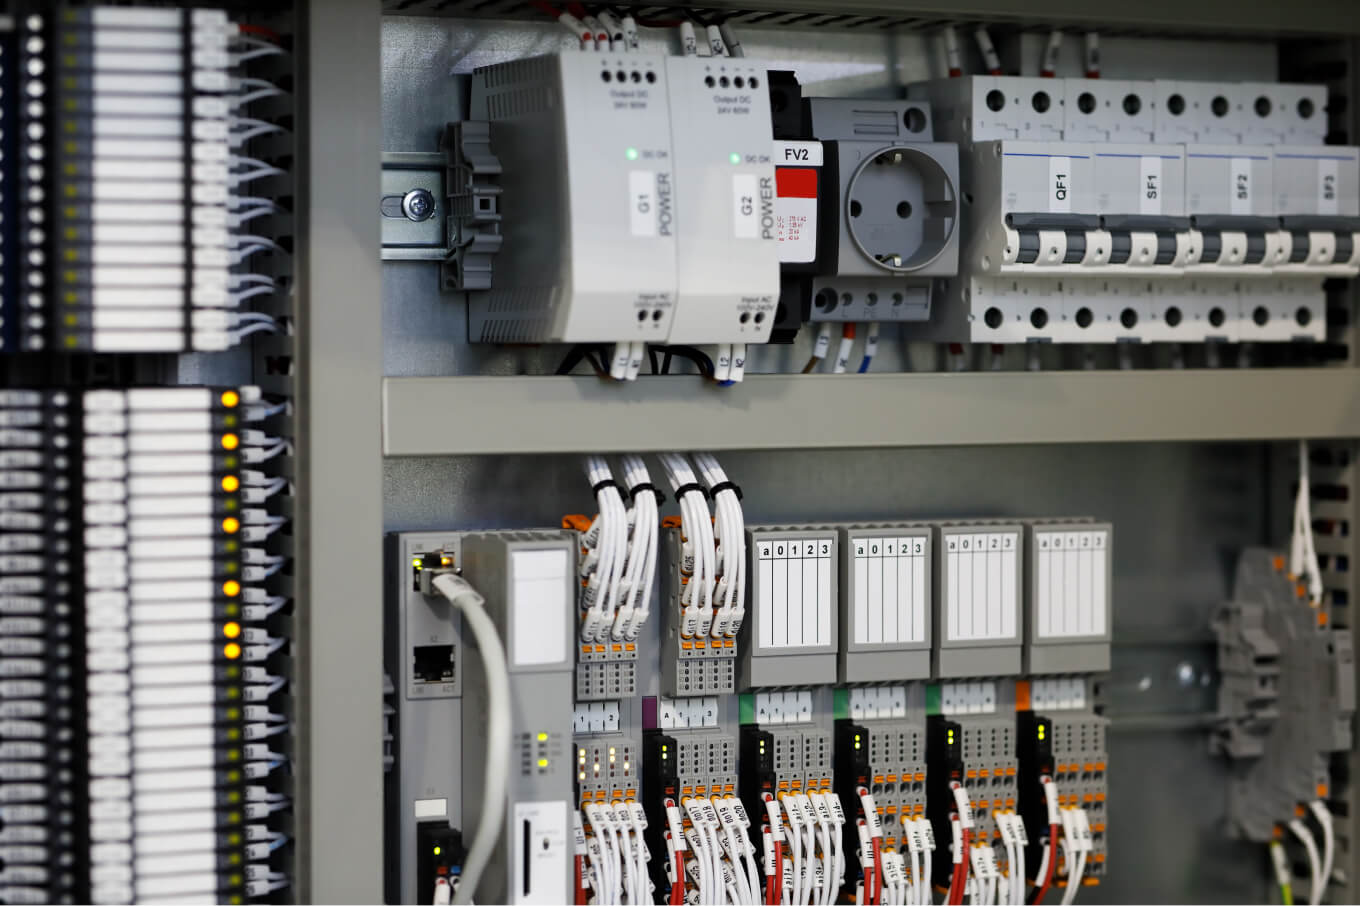 programmable logic controllers in PLC control system